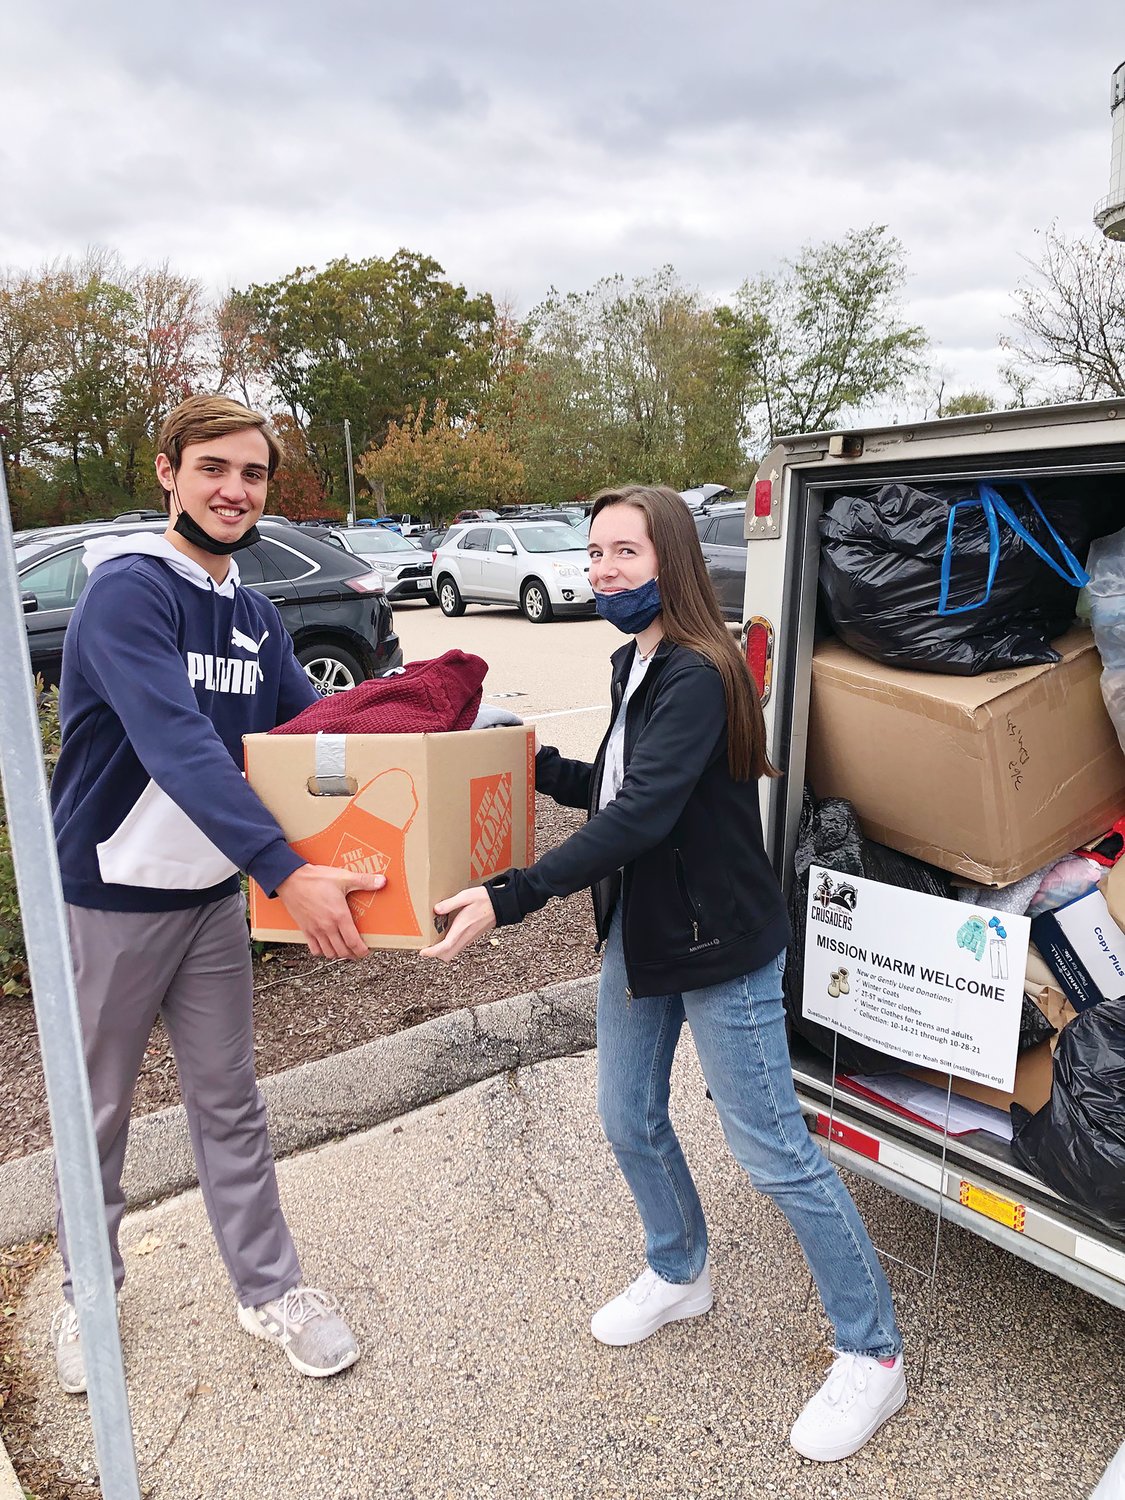 Prout student Ben Leal hands Operation Warm Welcome Administrator Ava Grosso, a Prout senior, a box of clothing items donated to the initiative, which will provide clothing for Afghan refugees currently at Fort McCoy, Wisconsin, as they wait to be resettled in the U.S.